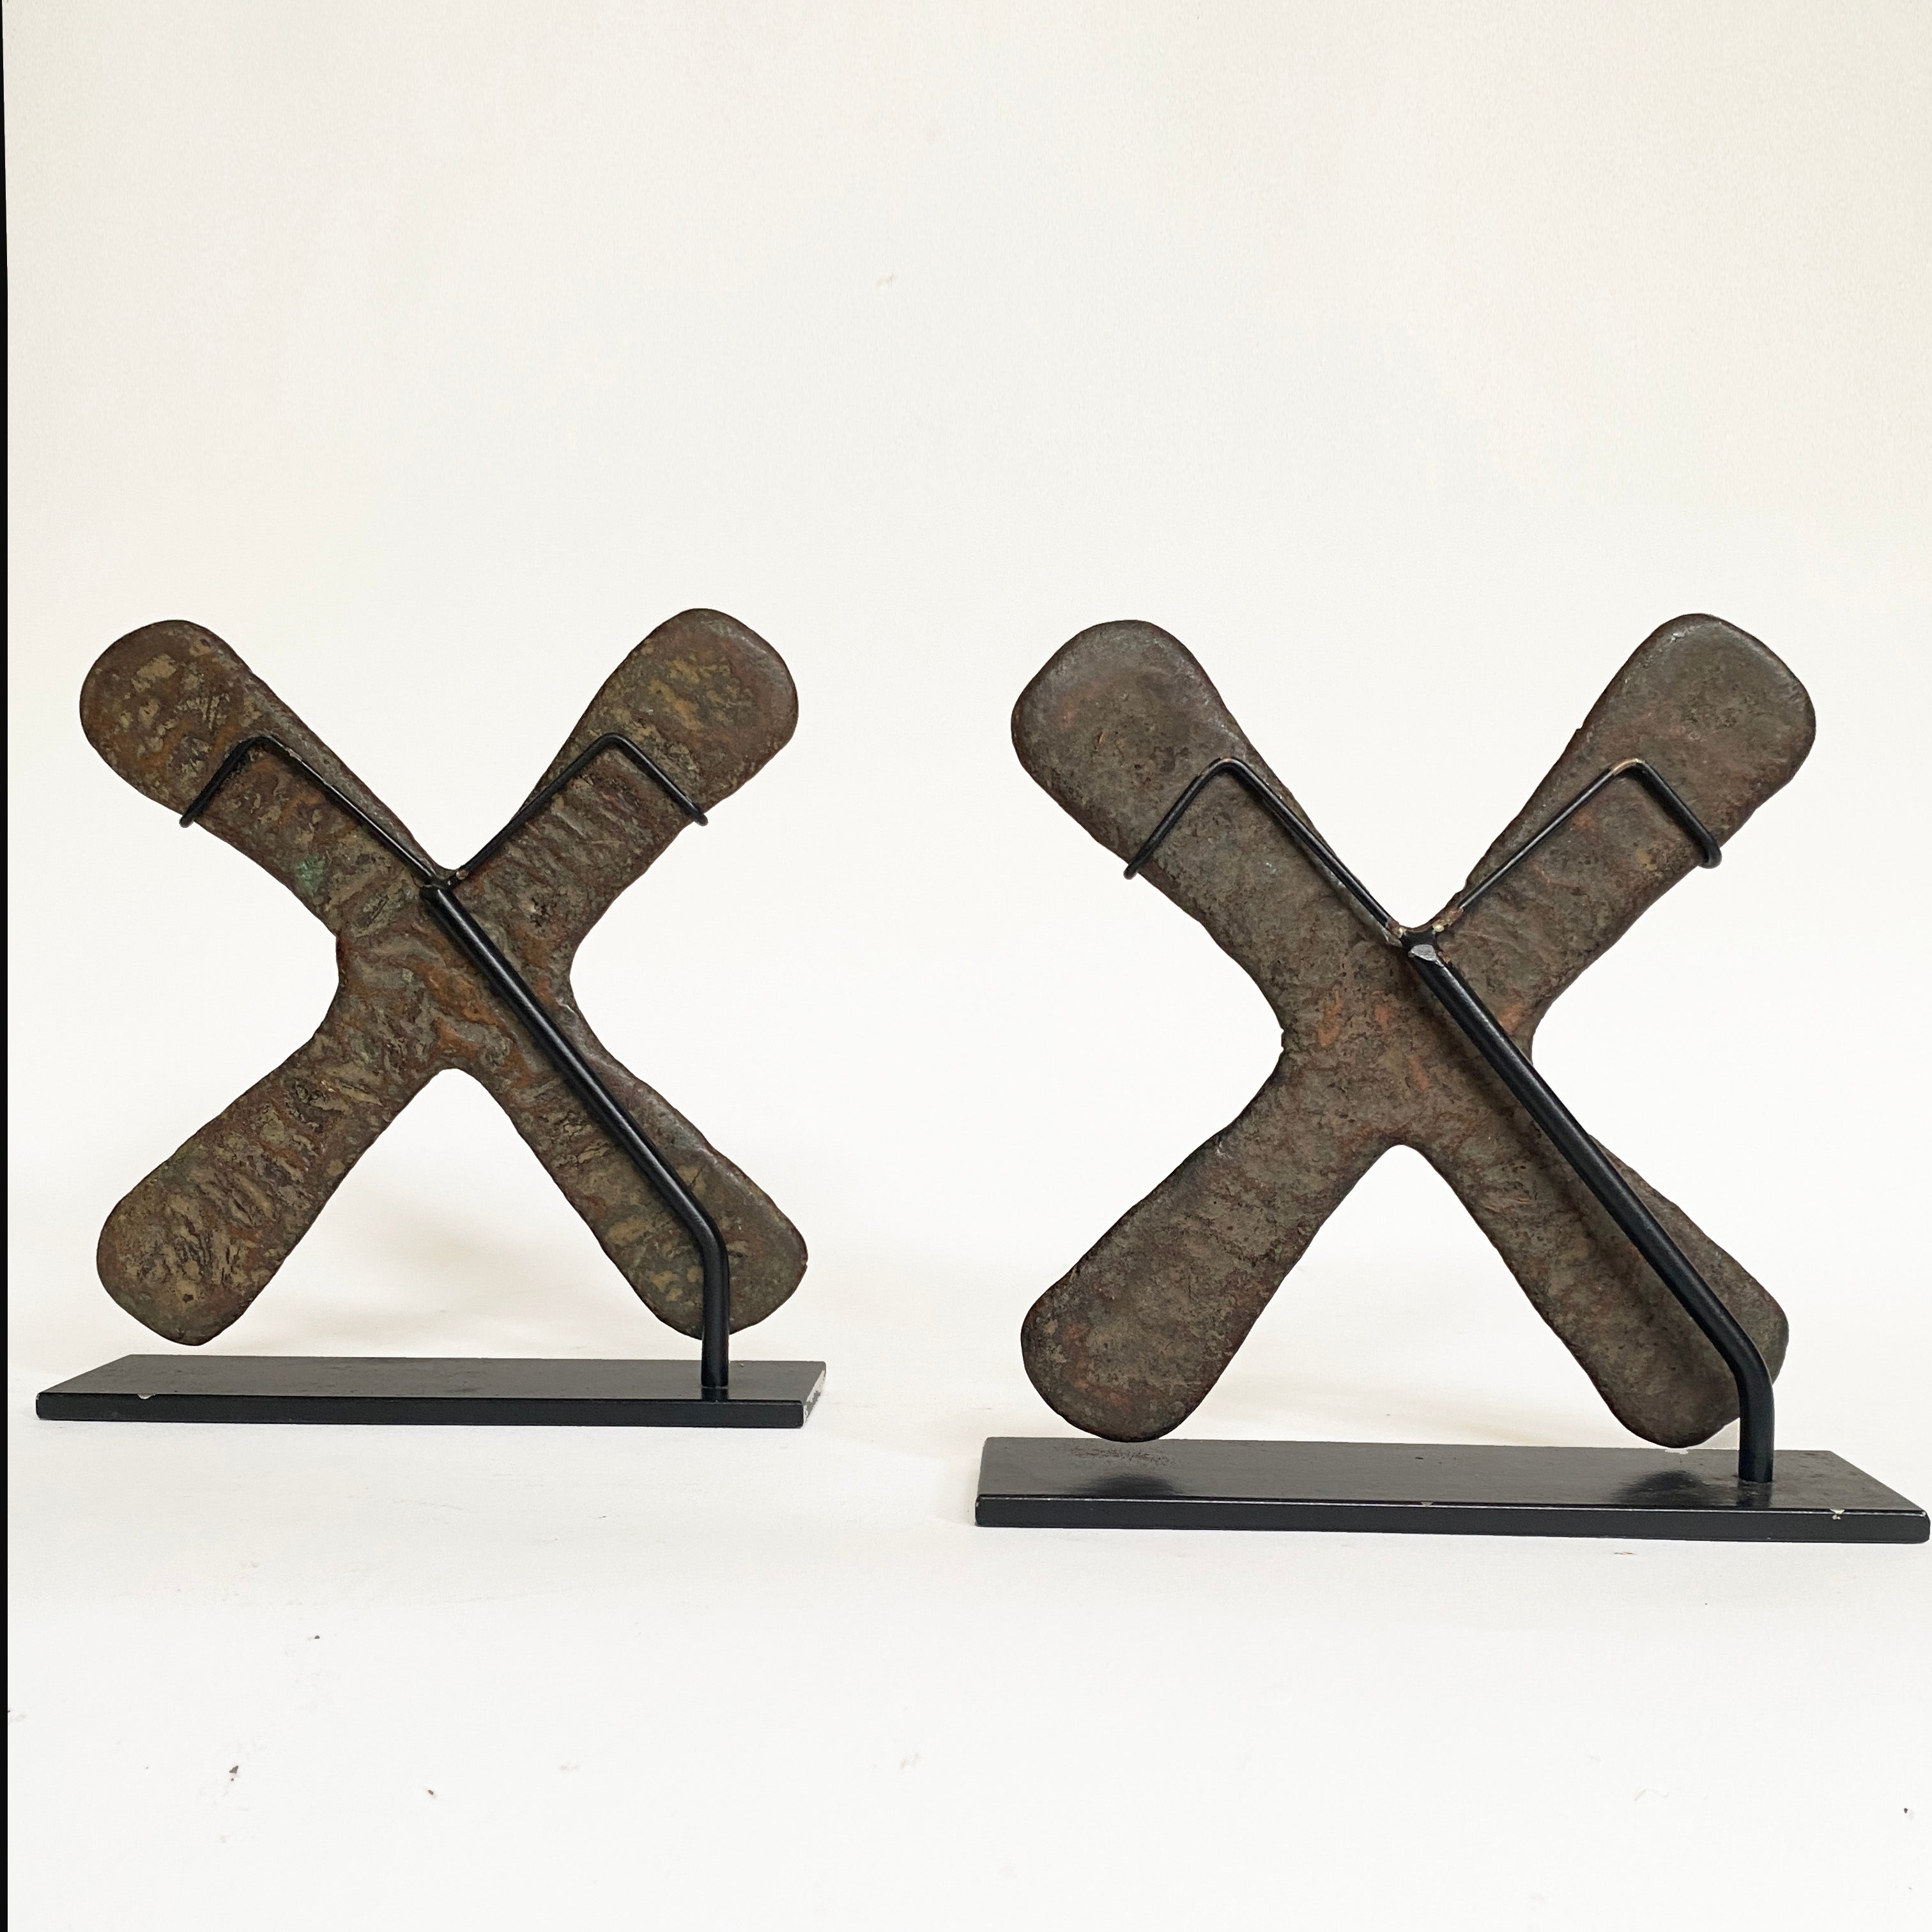 Copper crosses called Handa, Katanga region, Republic of Congo, 19th century.

Cast copper in the shape of an equal-armed cross used as a form of currency, called Handa, which were made in the Katanga region, Democratic Republic of Congo.